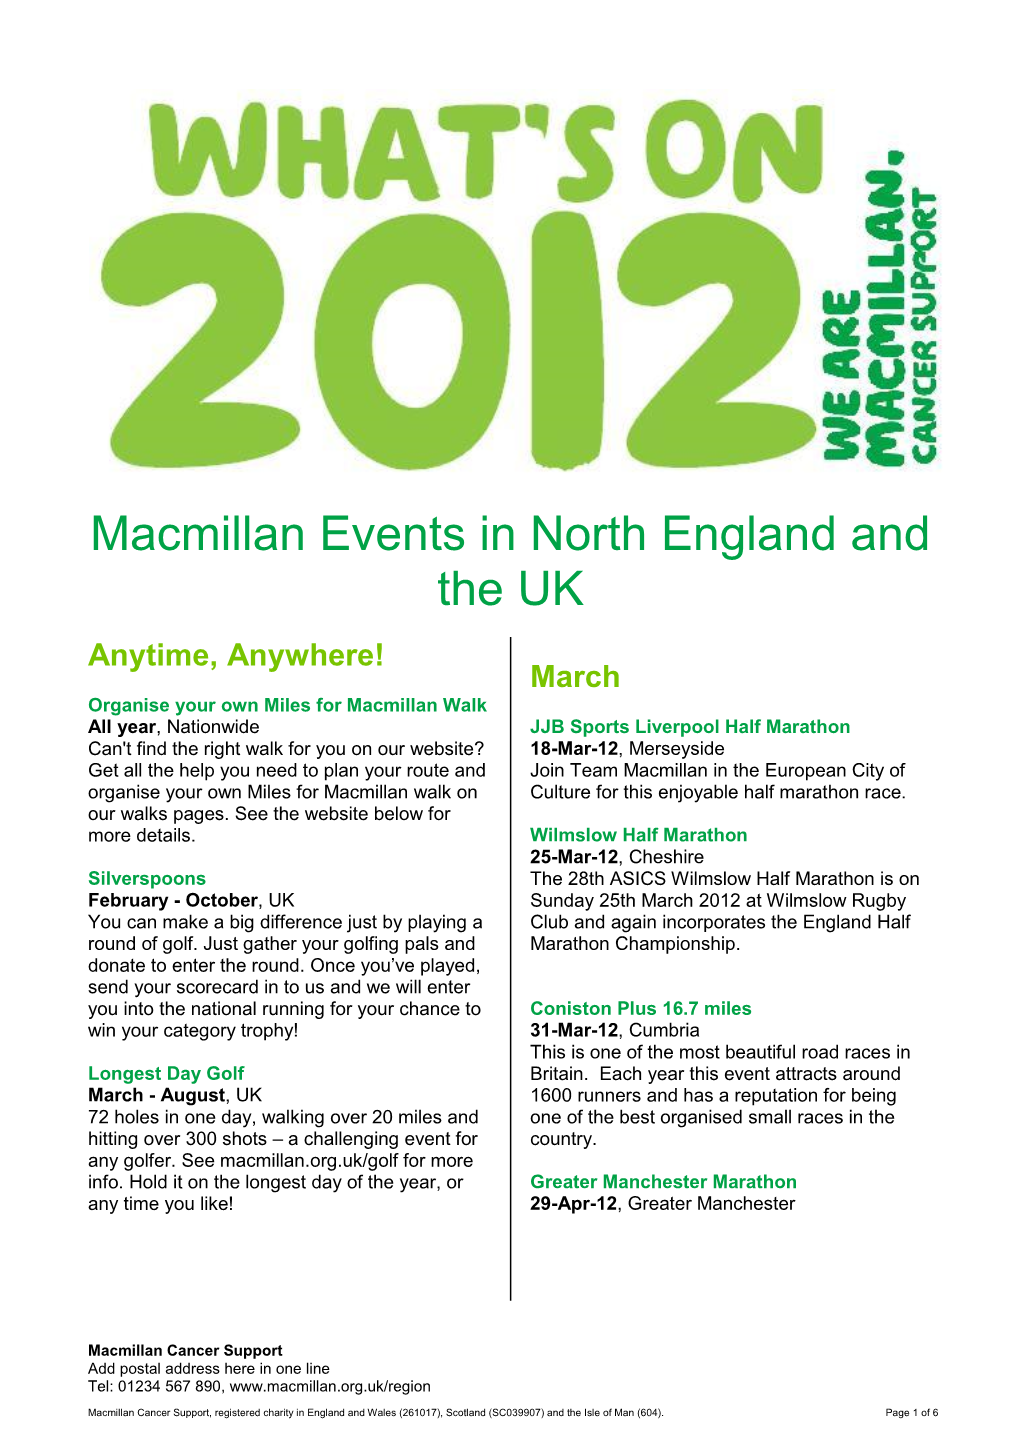 Macmillan Events in North England and the UK